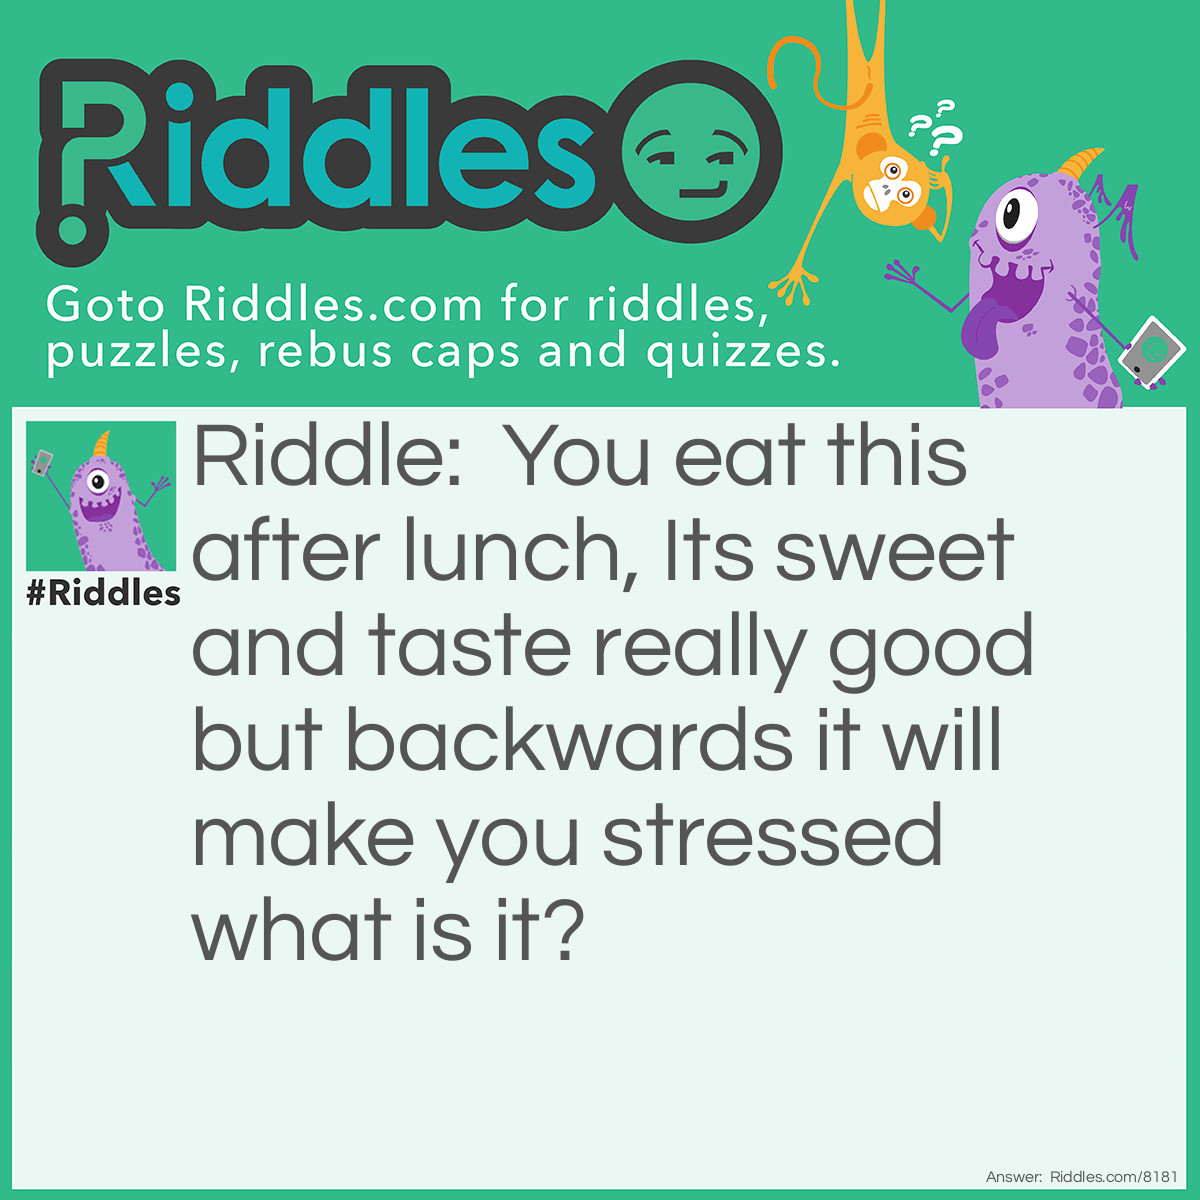 Riddle: You eat this after lunch, Its sweet and taste really good but backwards it will make you stressed what is it? Answer: Desserts. That's stressed backwards